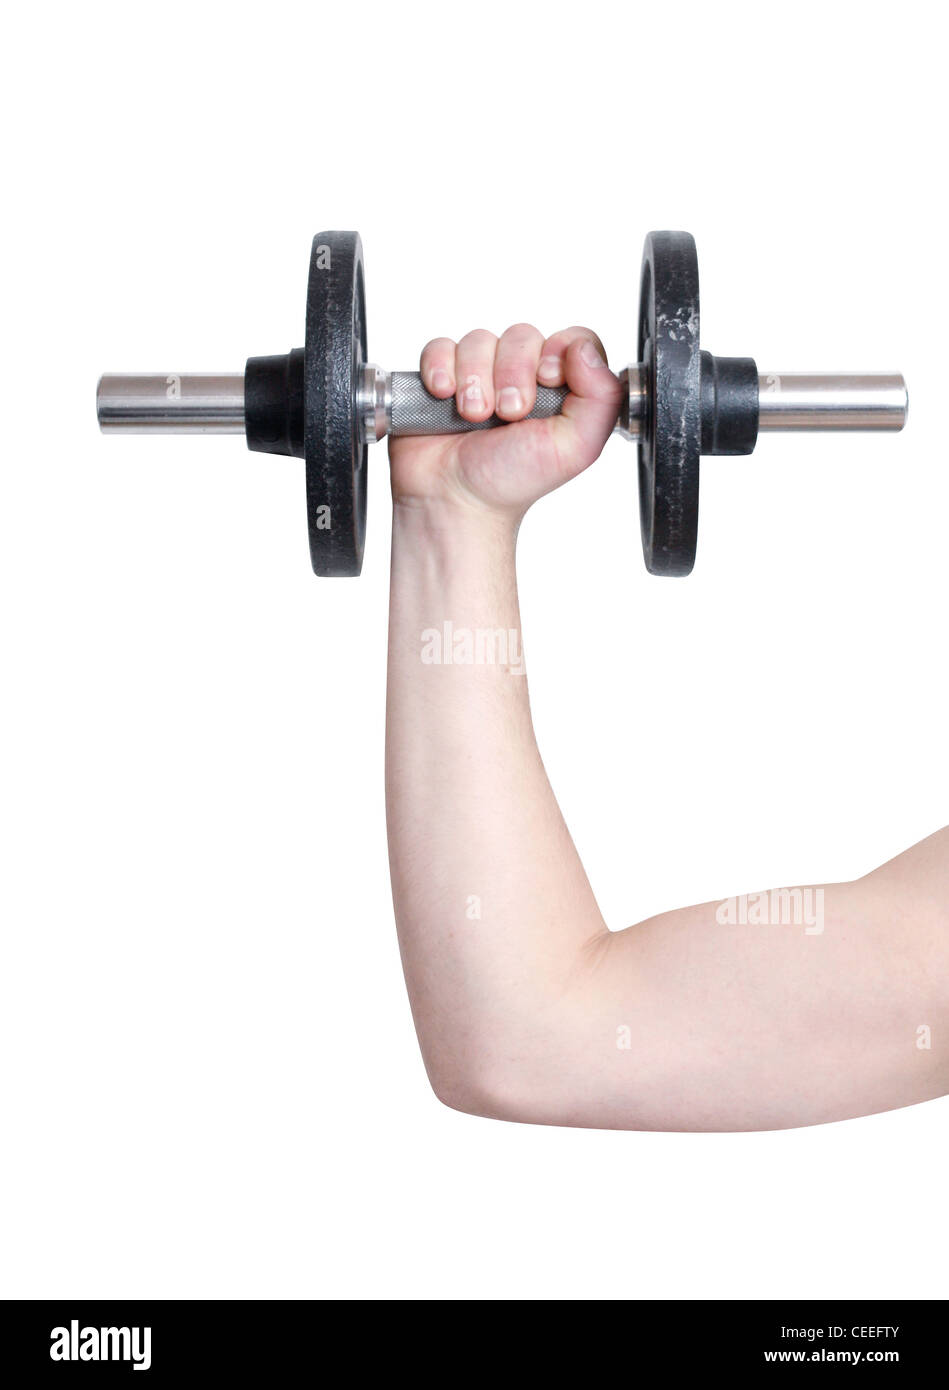 Arm lifting weight Stock Photo